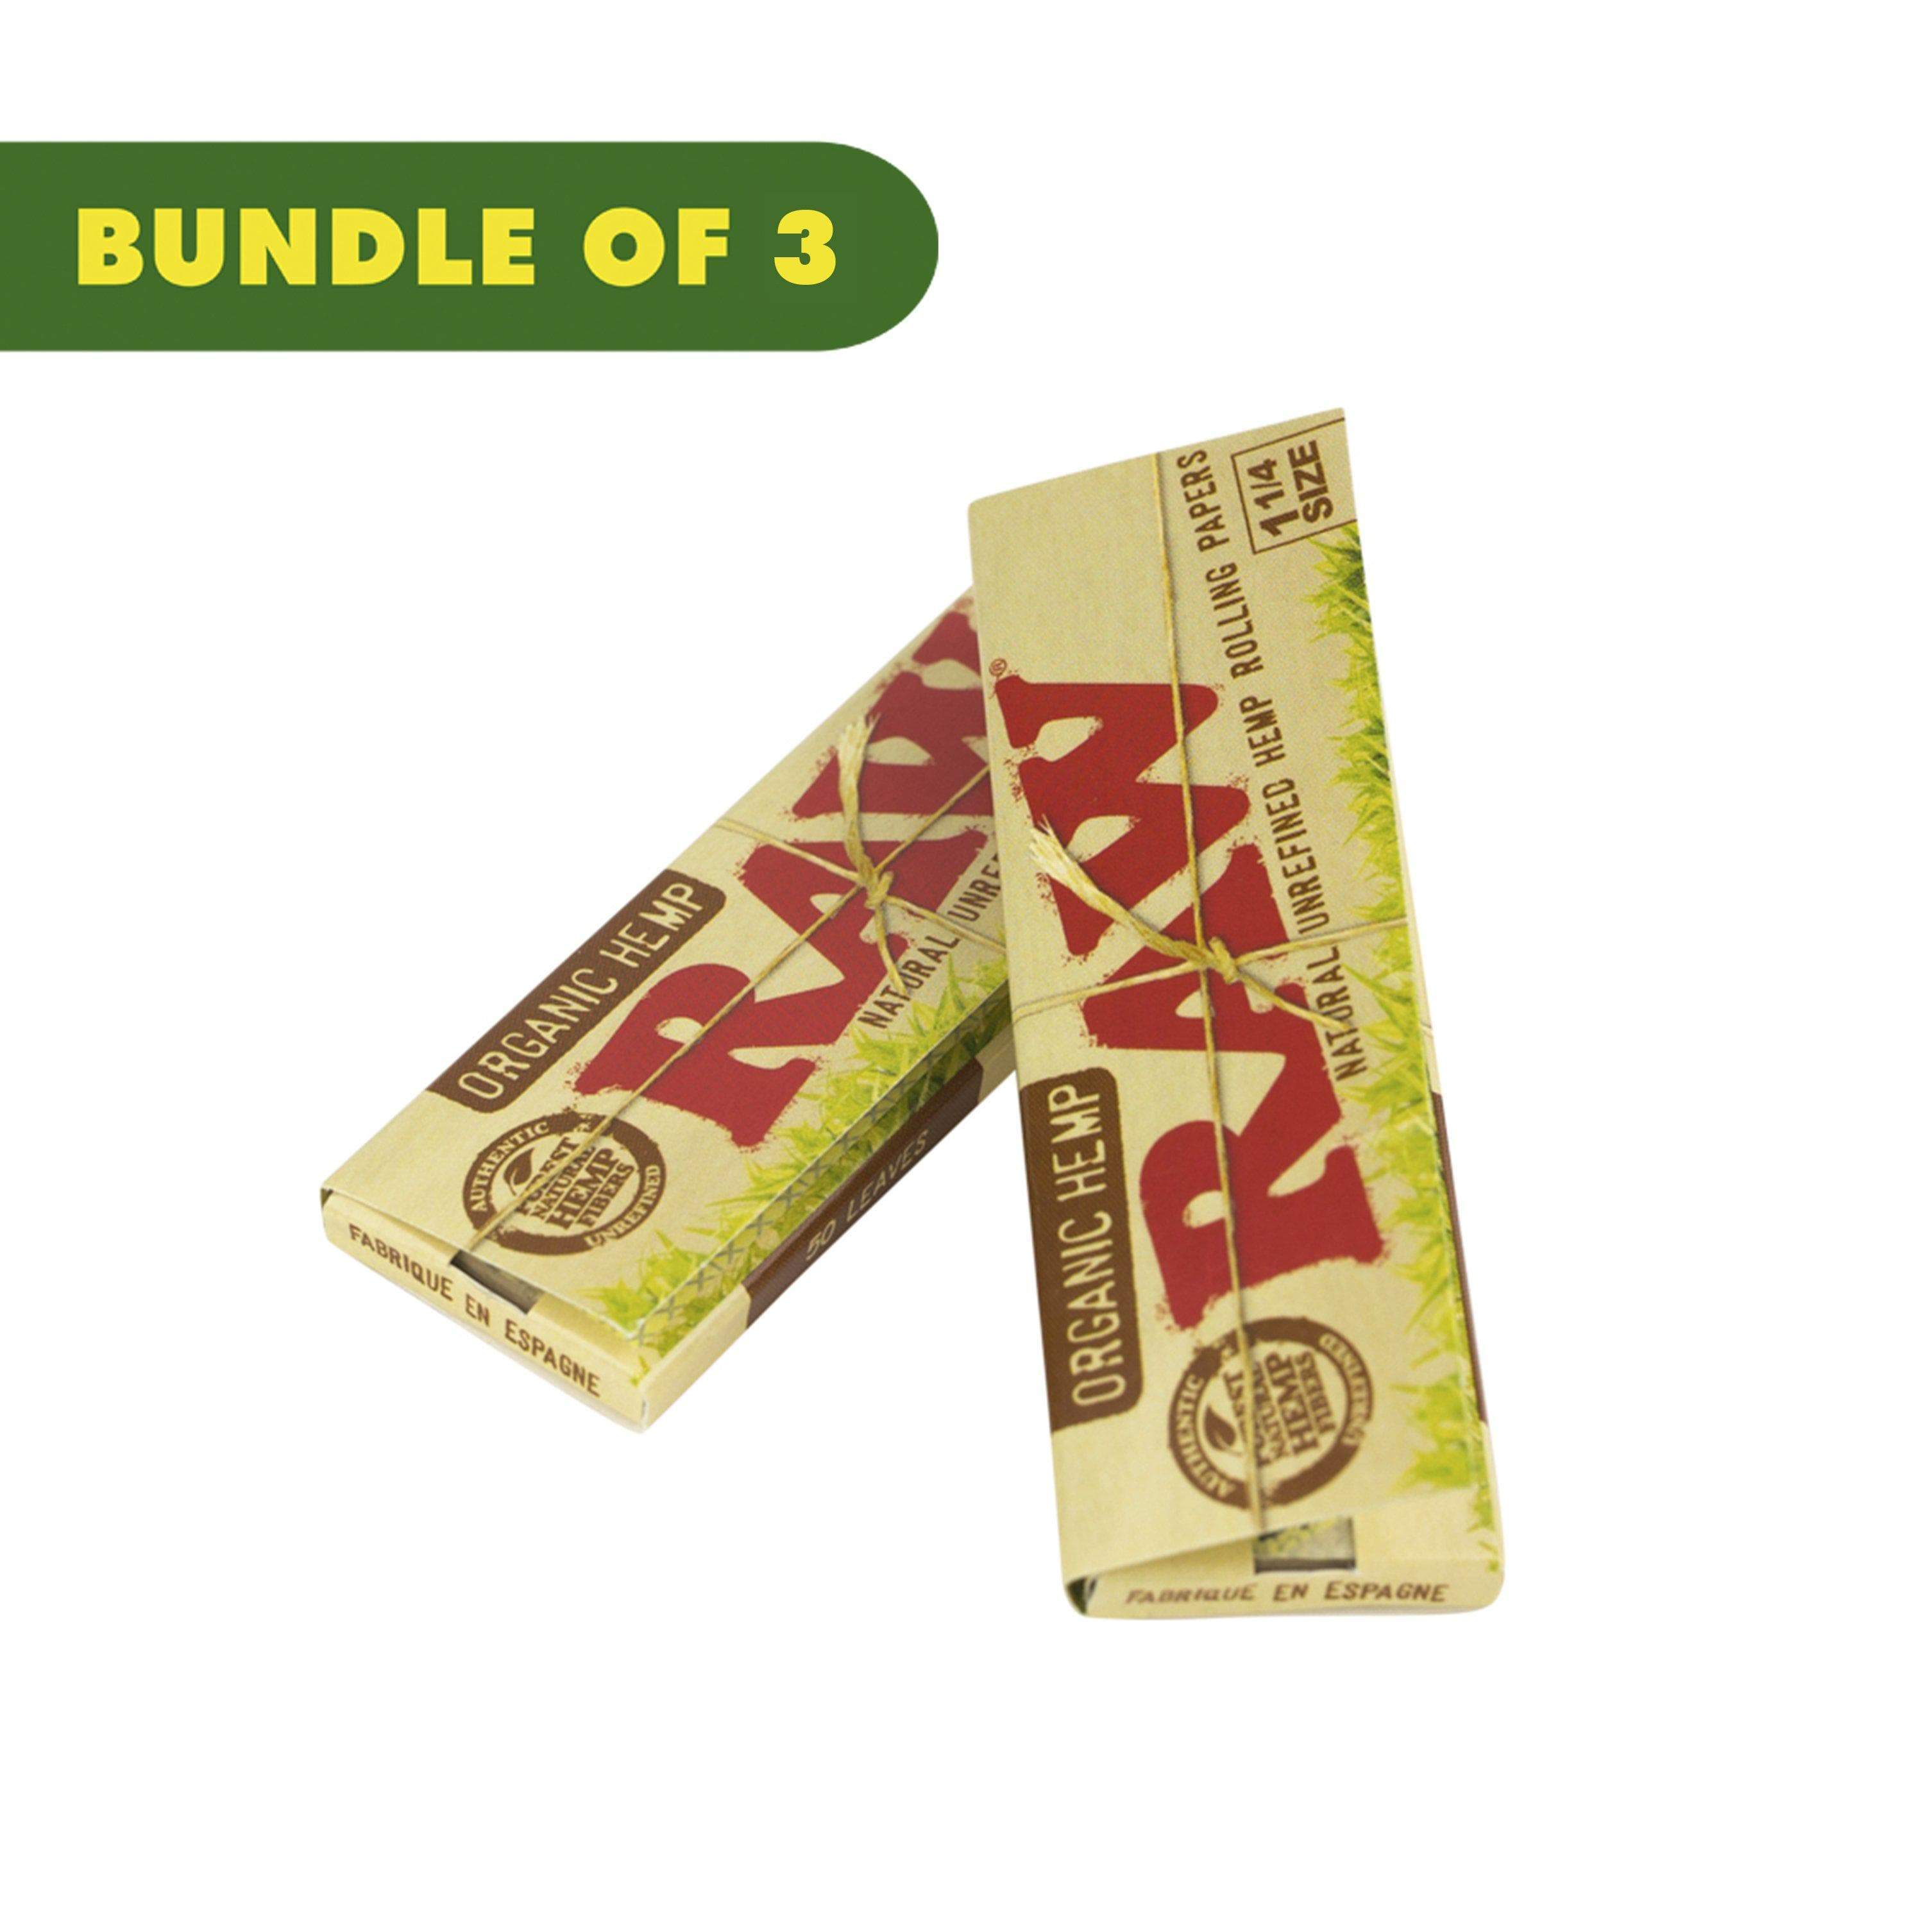 Rolling Paper Variety by RAW